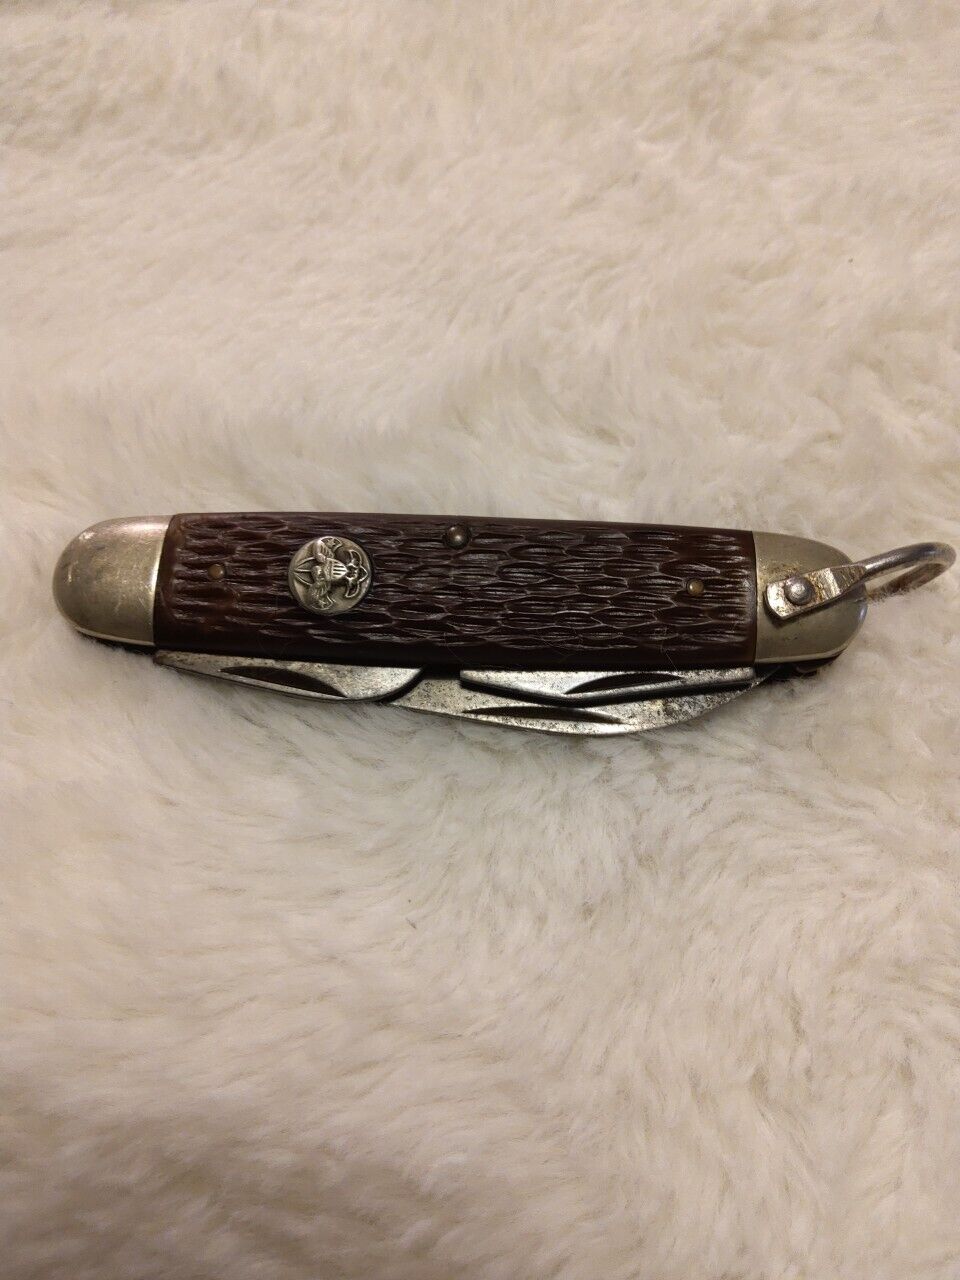 Vintage Boy Scout 4 Blade Pocket Knife Made in the USA